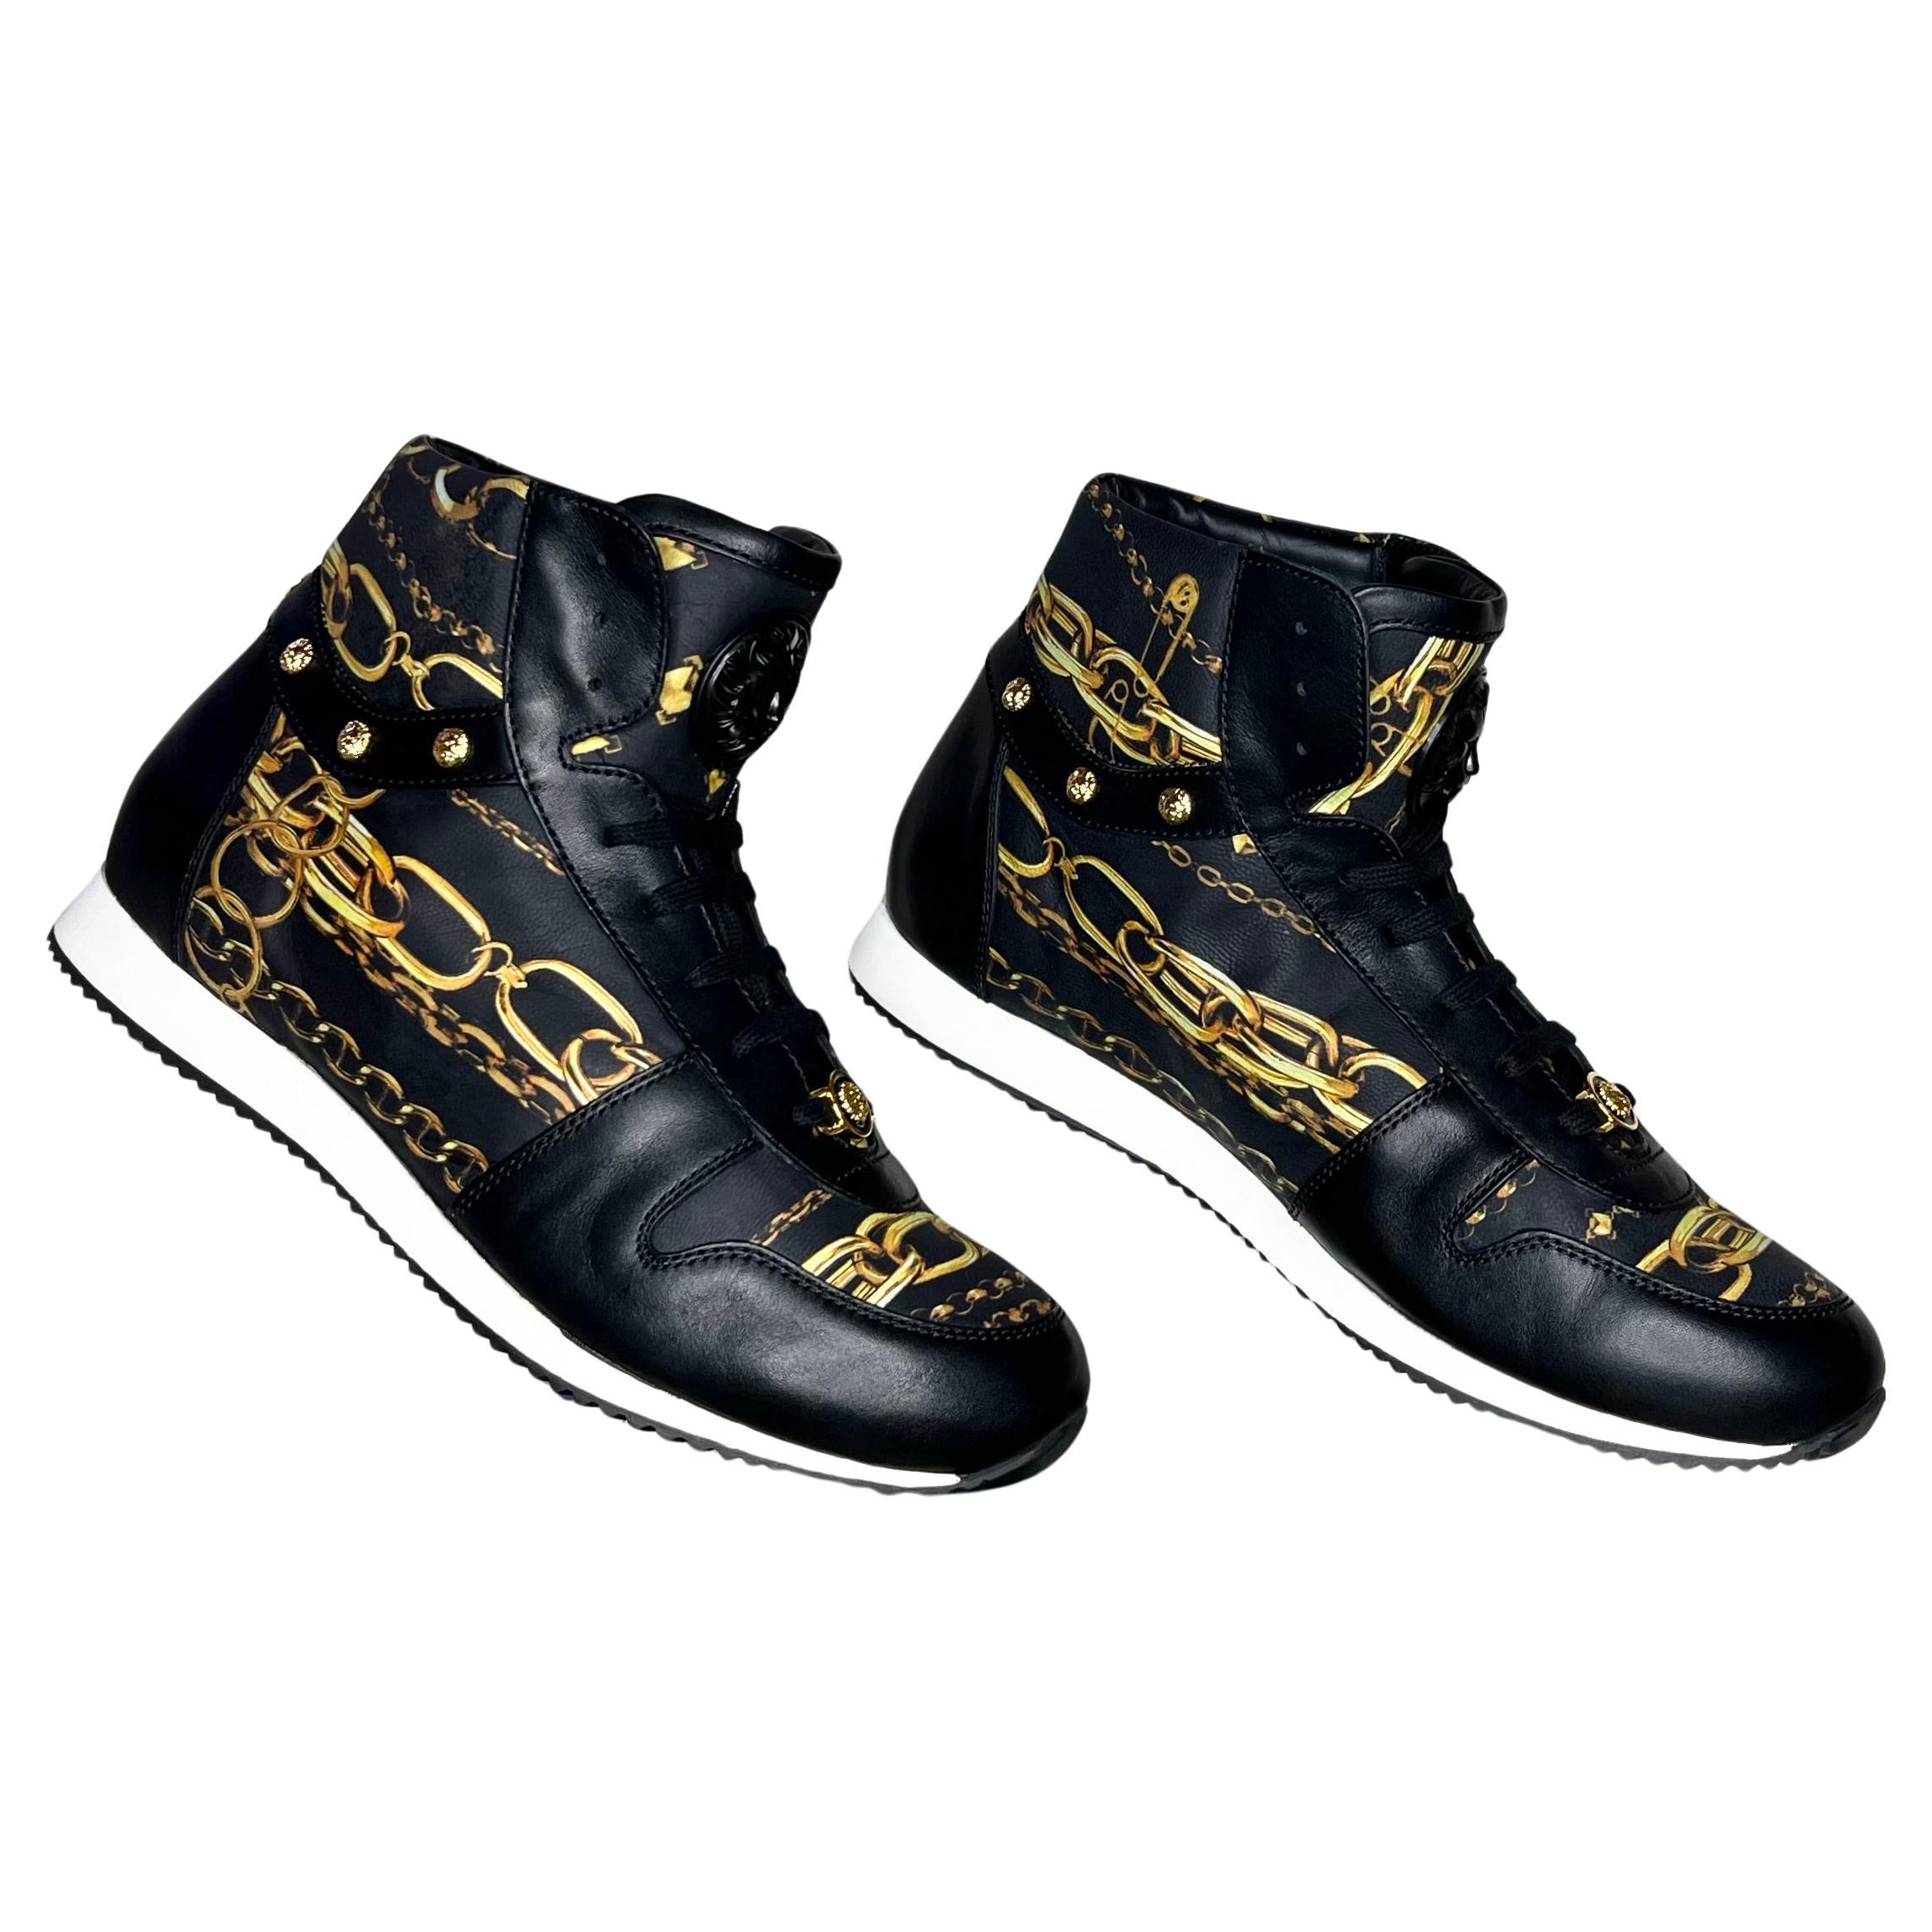 VERSACE HIGH-TOP SNEAKERS w/3D MEDUSA BUCKLE and GOLD-TONE ELEMENTS 44.5 - 11.5 For Sale